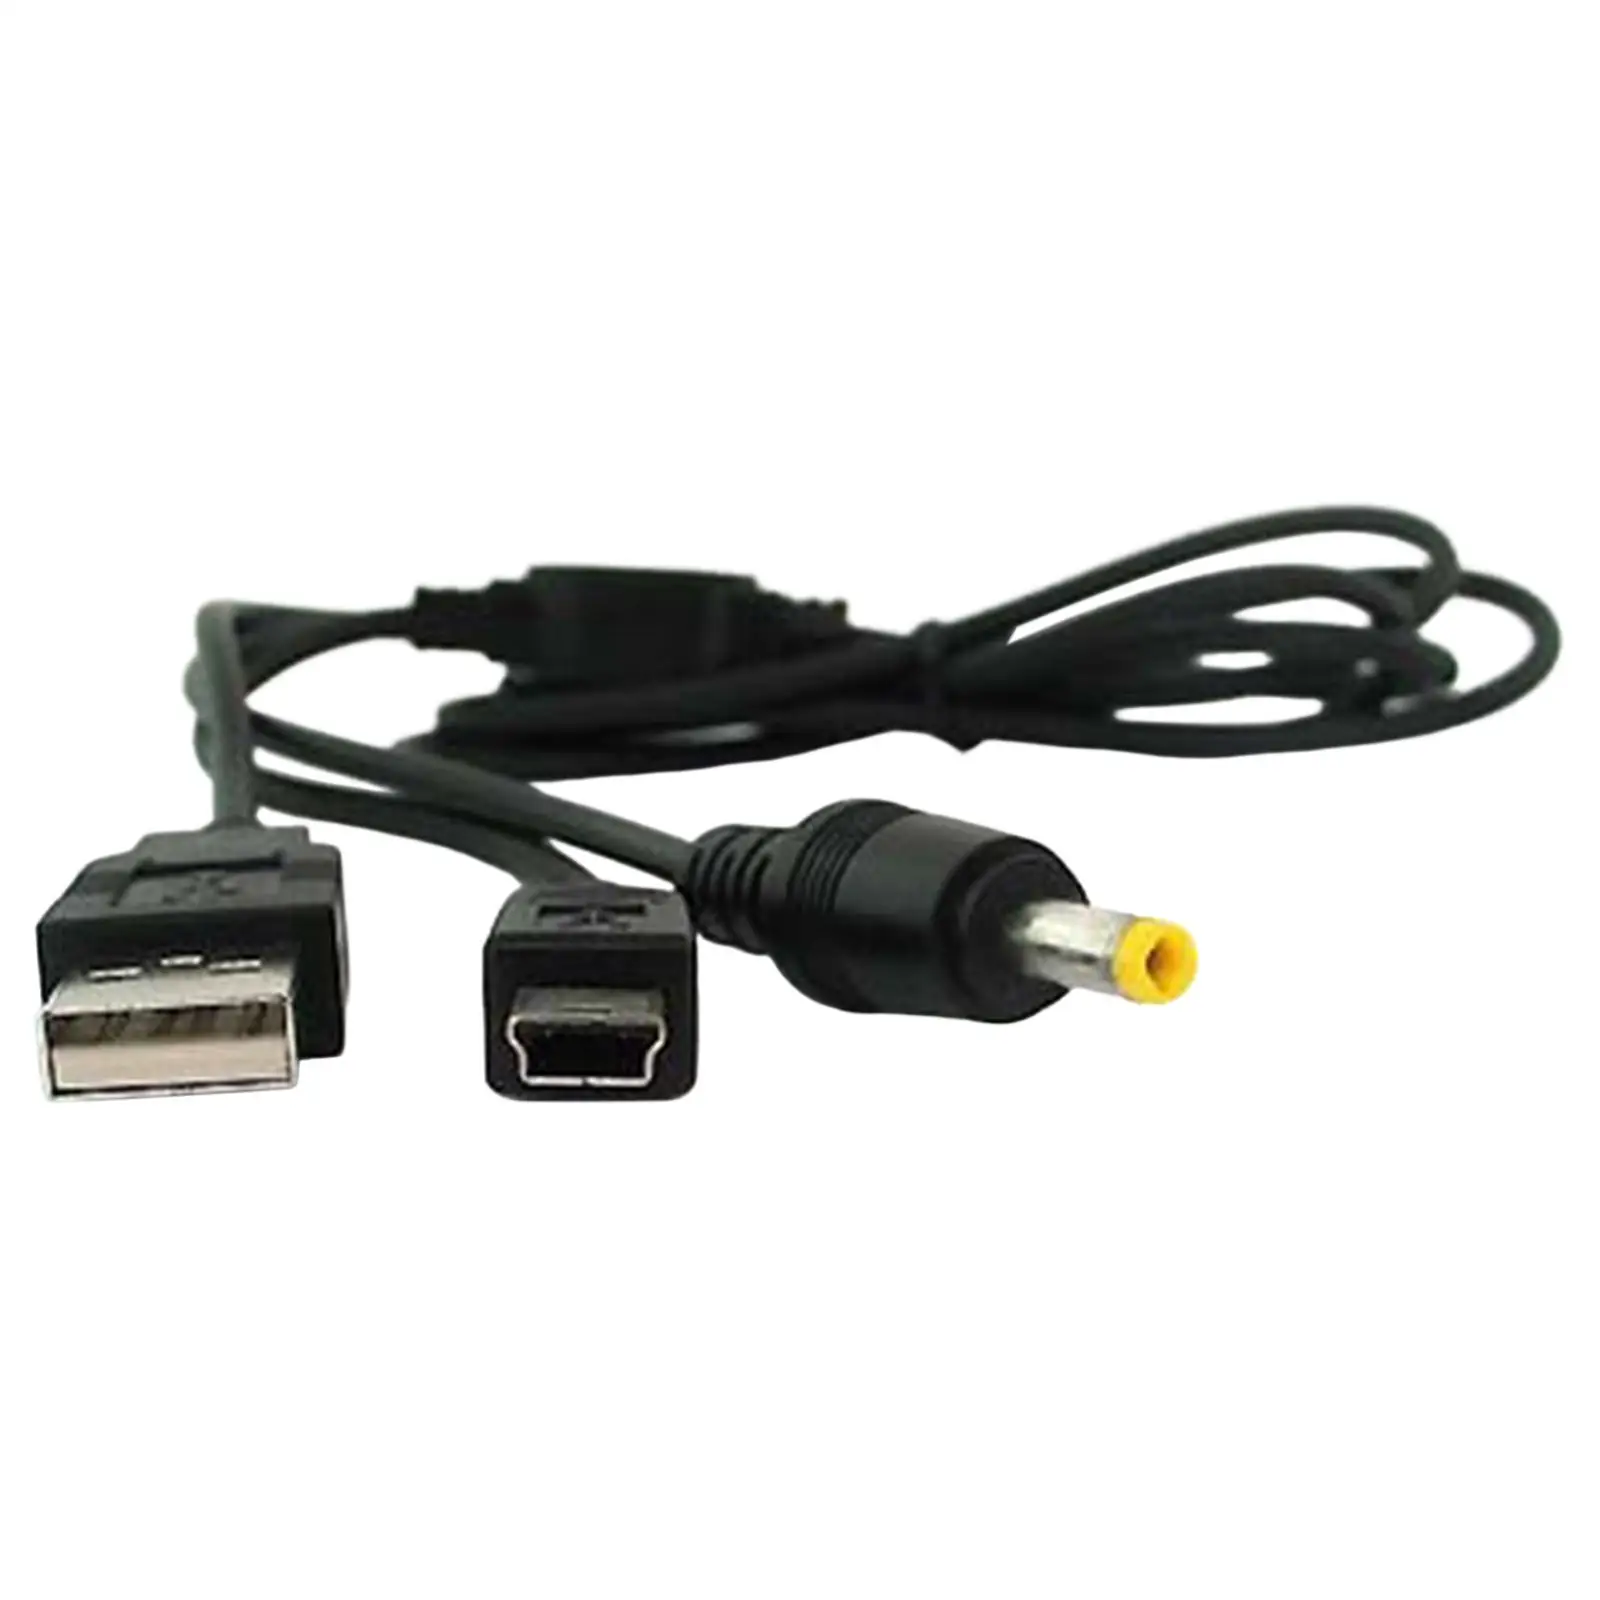 2 in 1 USB Charging Cable High Speed Data Line Replacement for Sony Psp 1000 2000 3000 Series Black Games Portable Power Cord